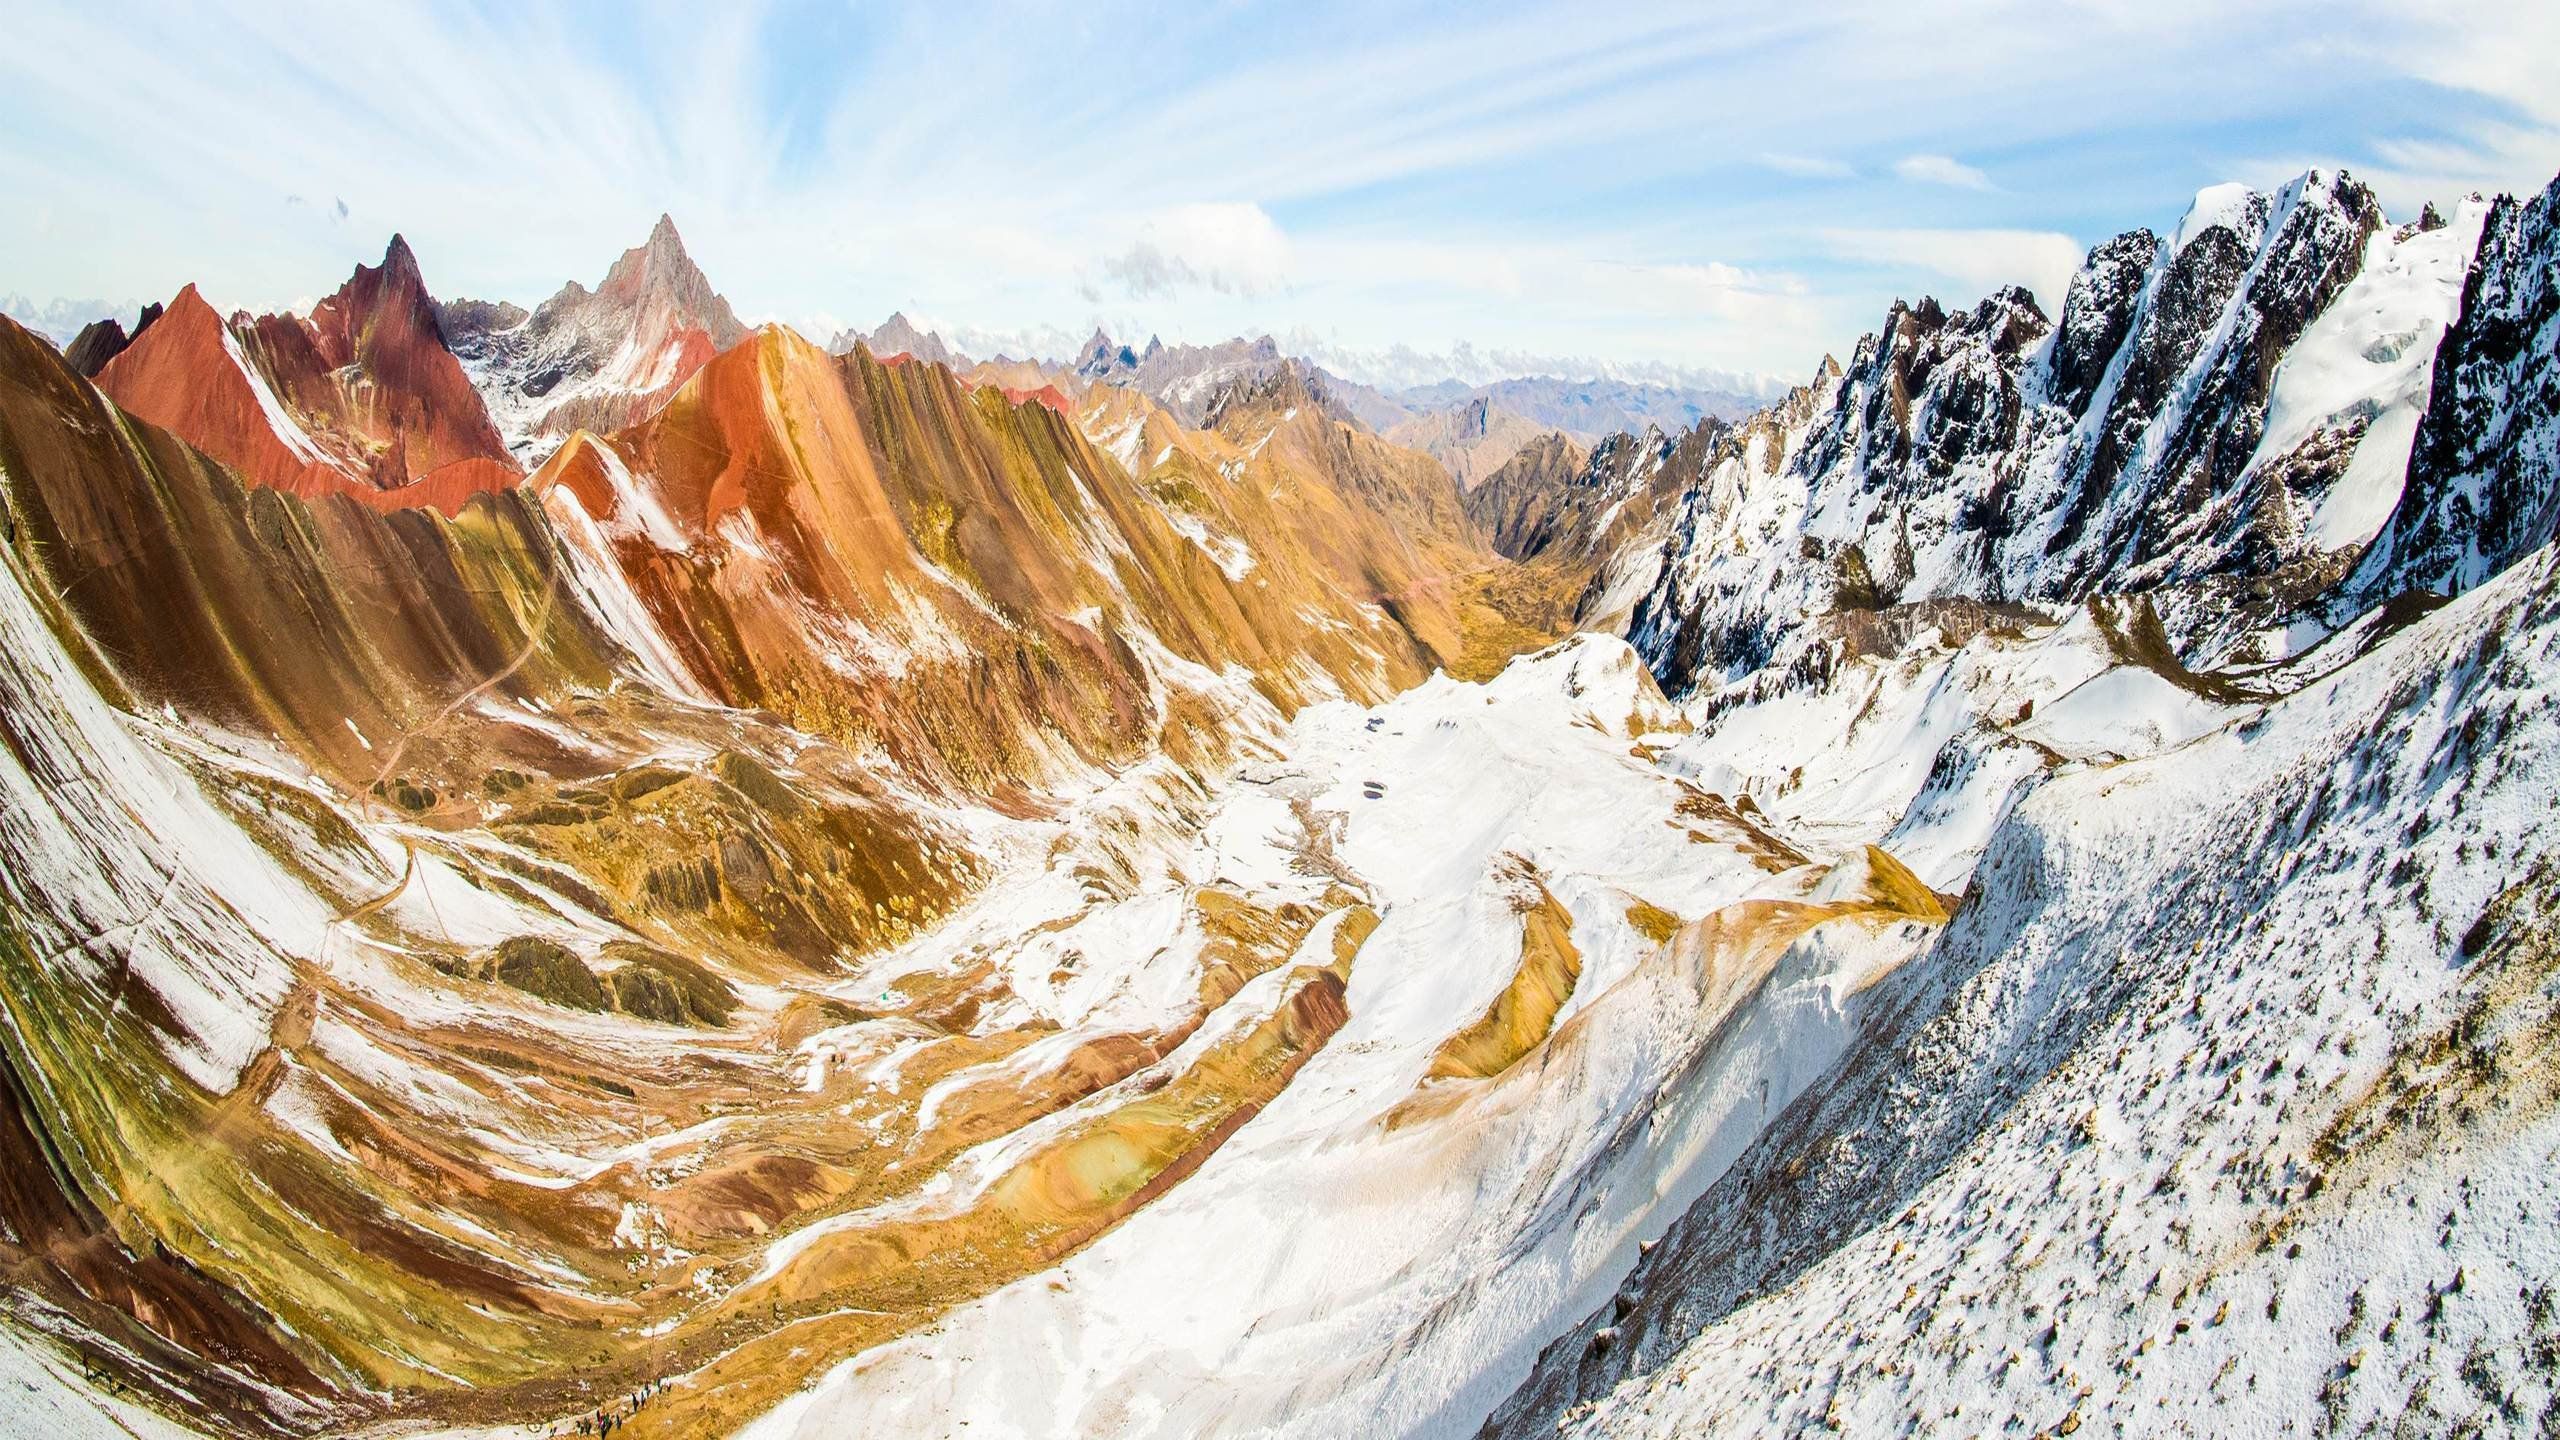 Andes 4K wallpaper for your desktop or mobile screen free and easy to download